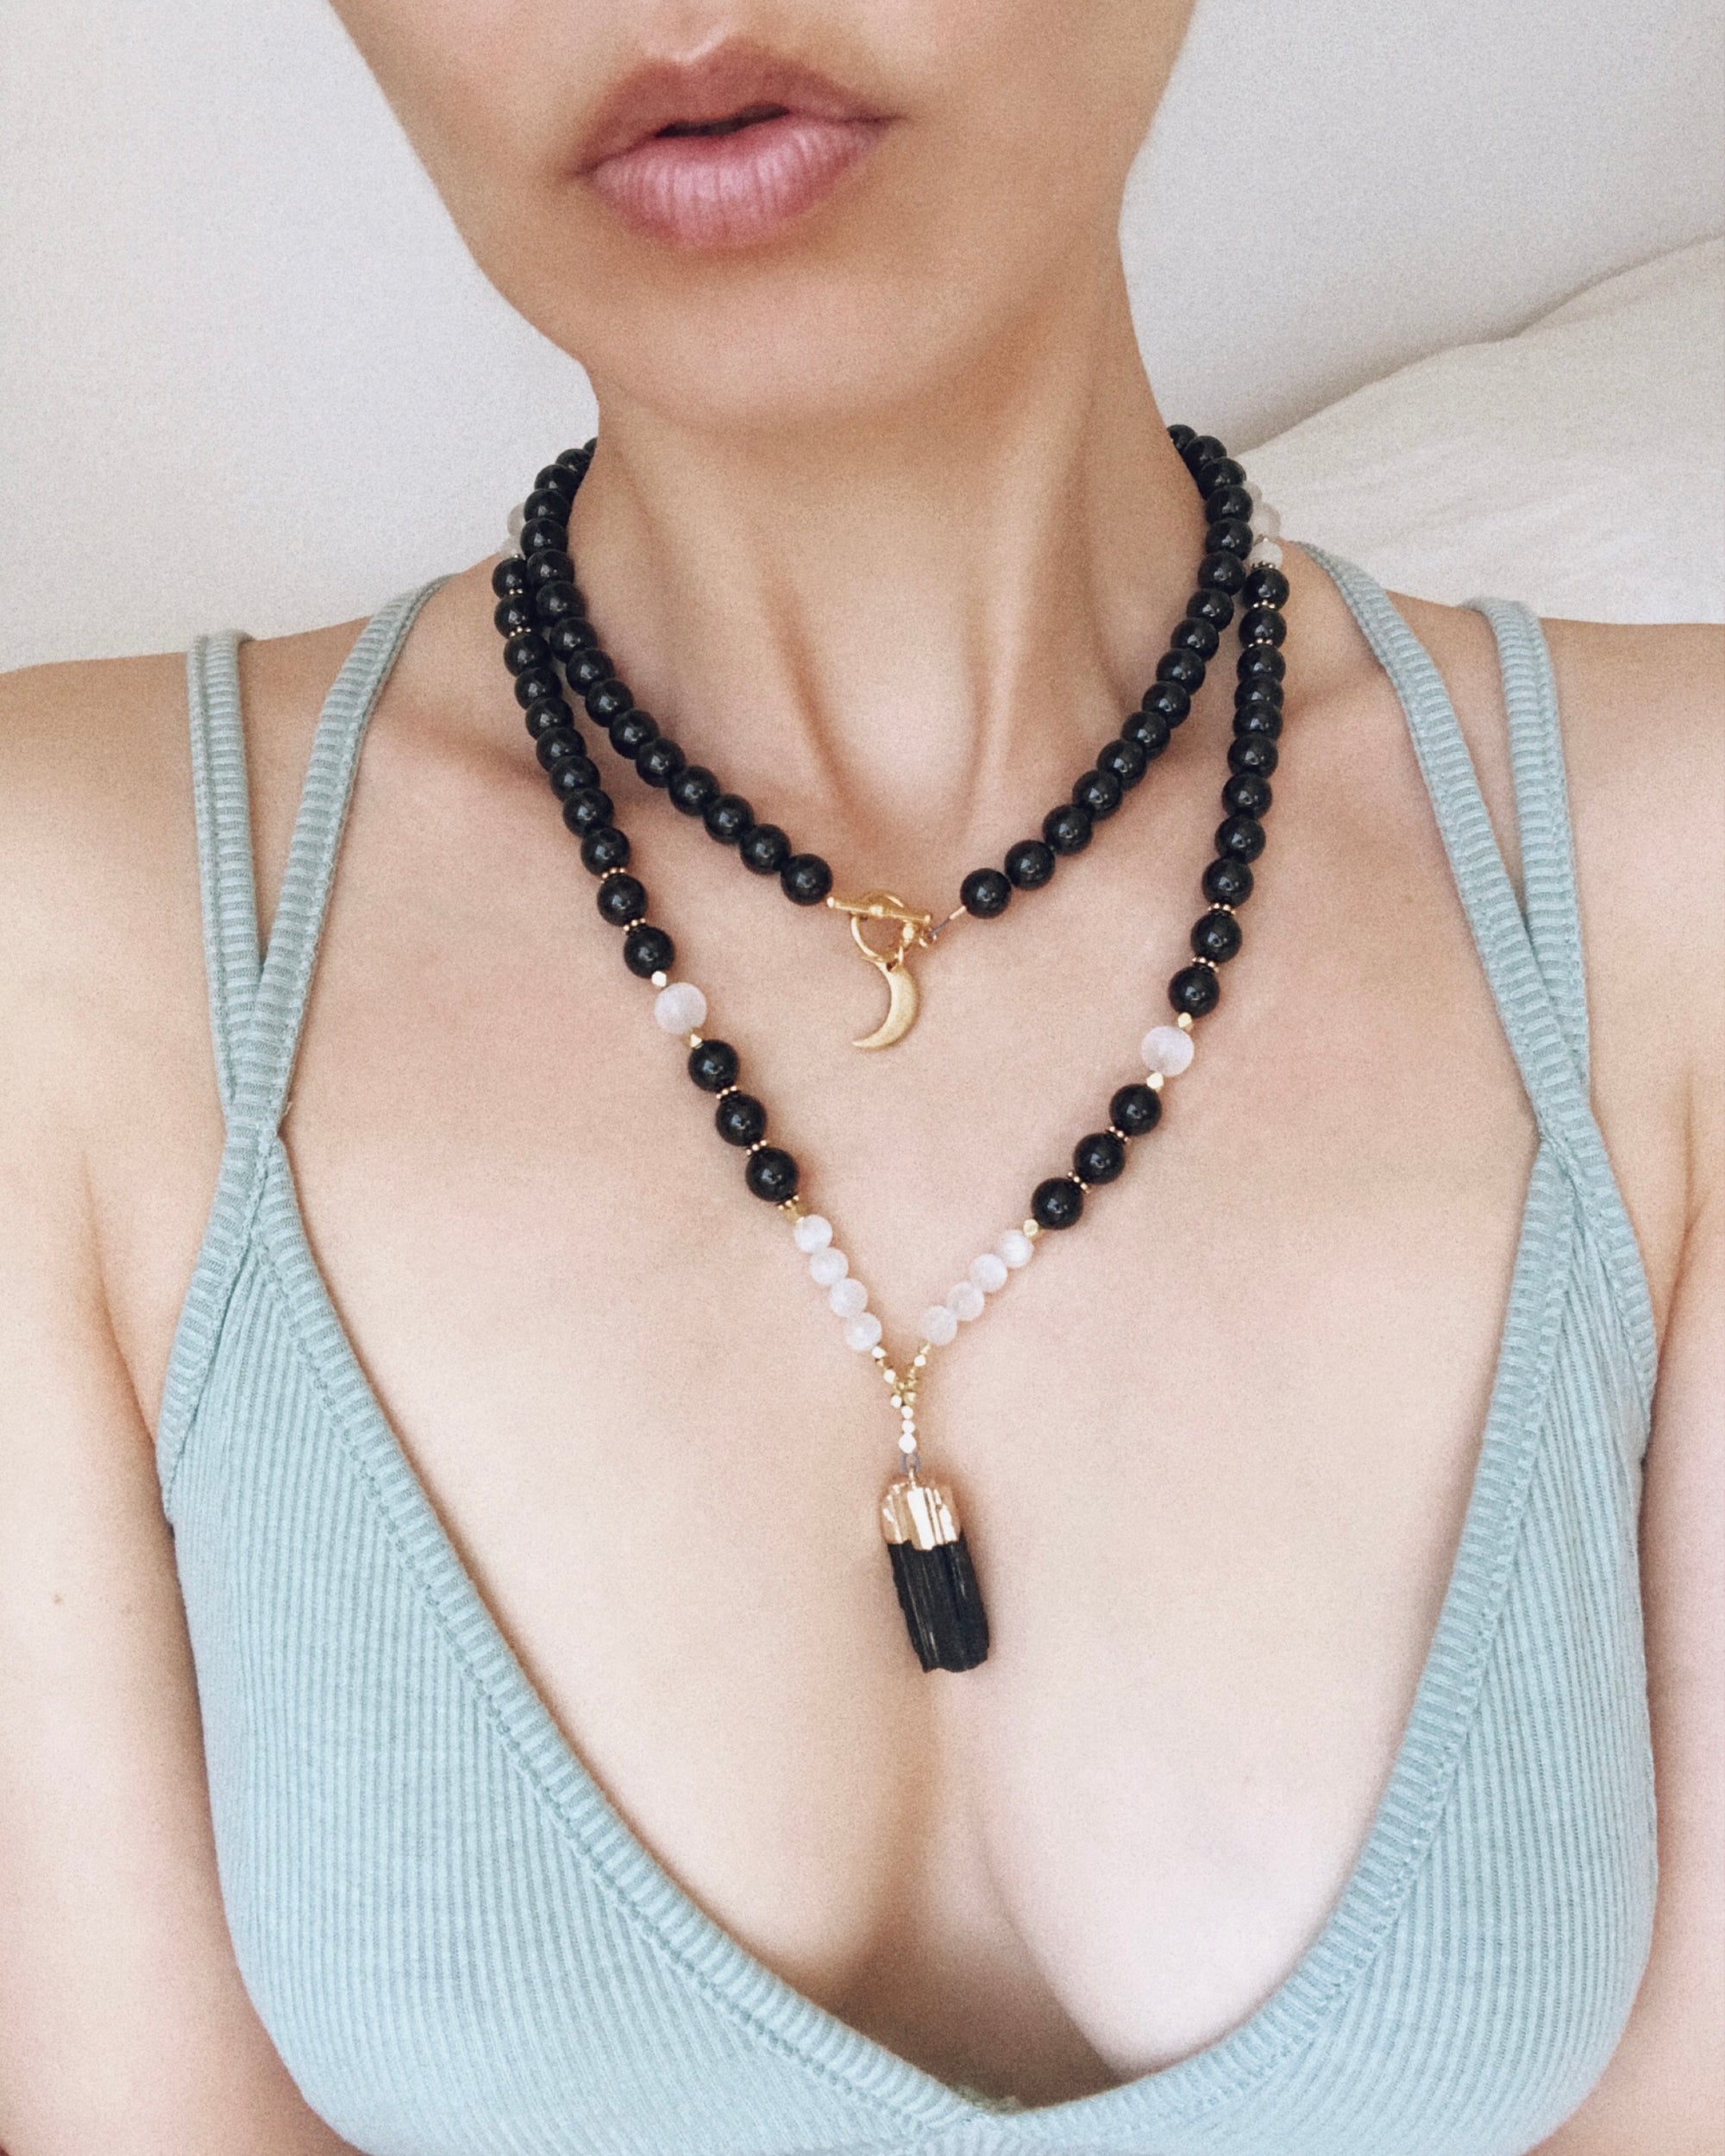 Moon Goddess Necklace, Selenite and Black Tourmaline Mala Necklace with Raw Tourmaline pendant and gold accents, spiritual jewelry